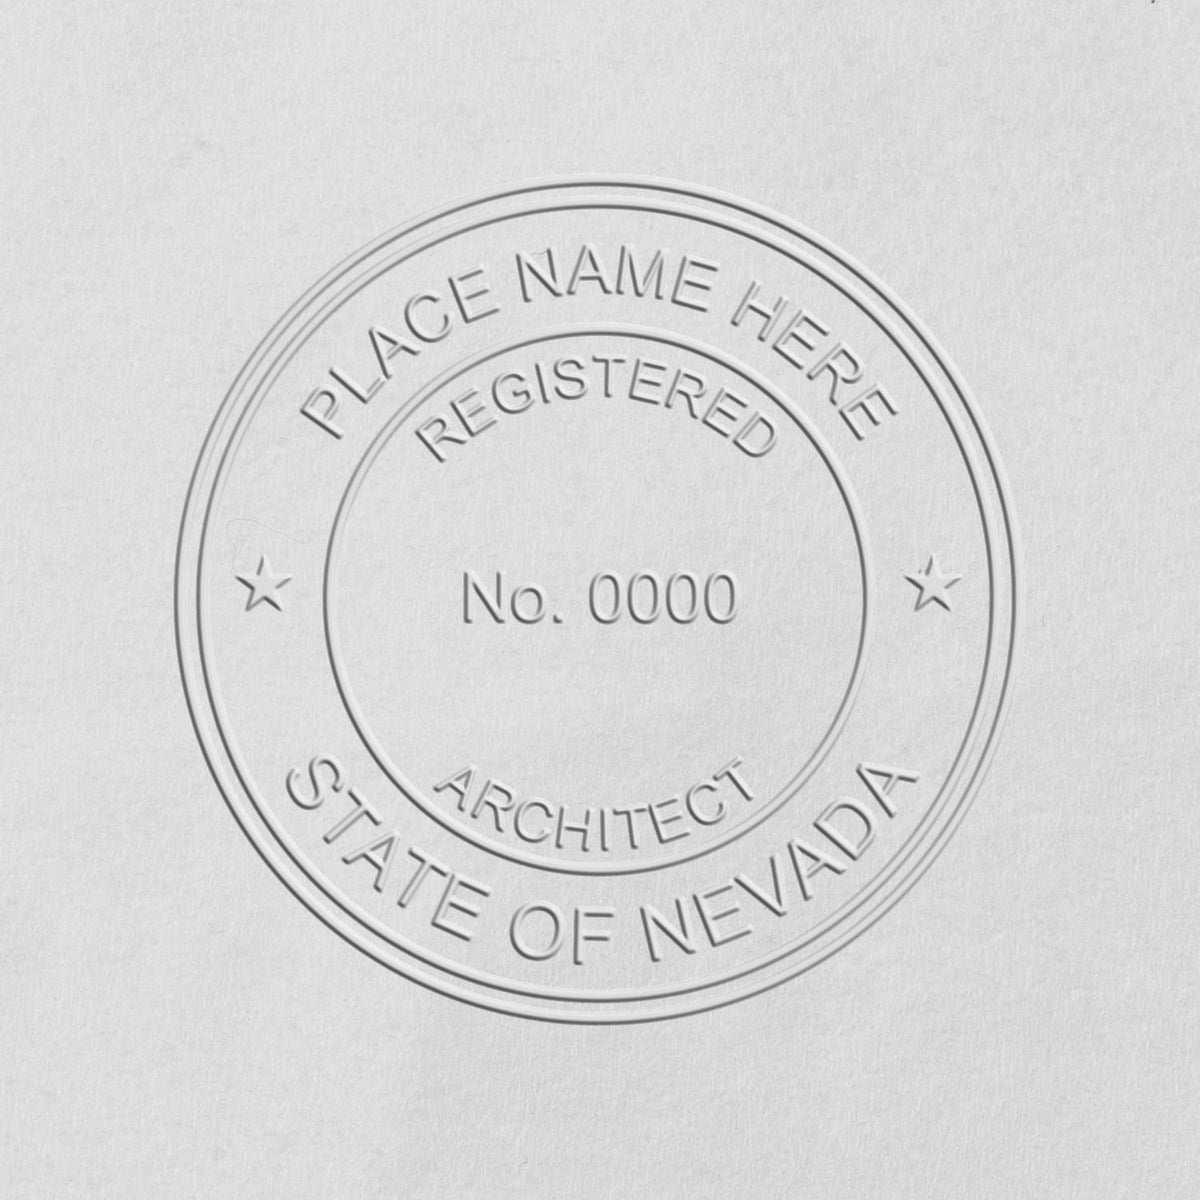 The Gift Nevada Architect Seal stamp impression comes to life with a crisp, detailed image stamped on paper - showcasing true professional quality.